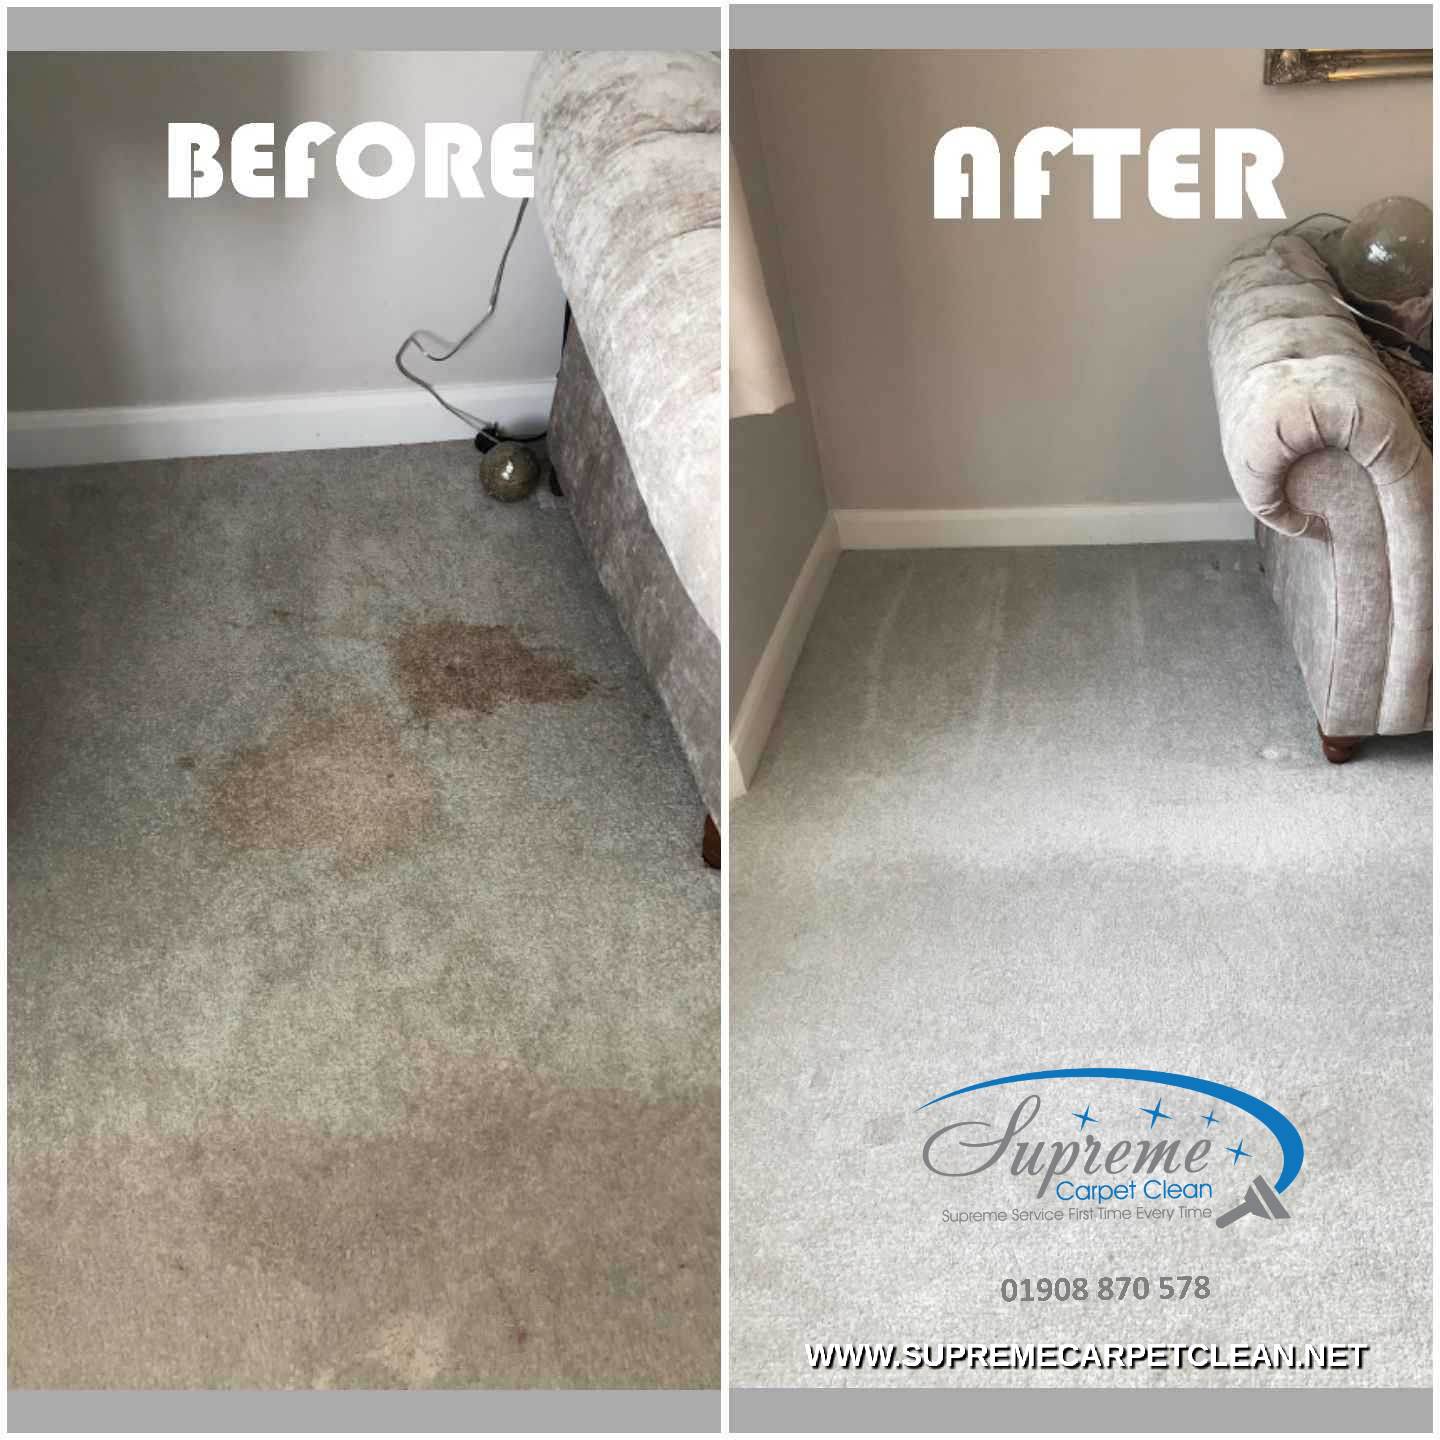 before and after image of sofa clean completed by Supreme Carpet Clean20171022_083103.png